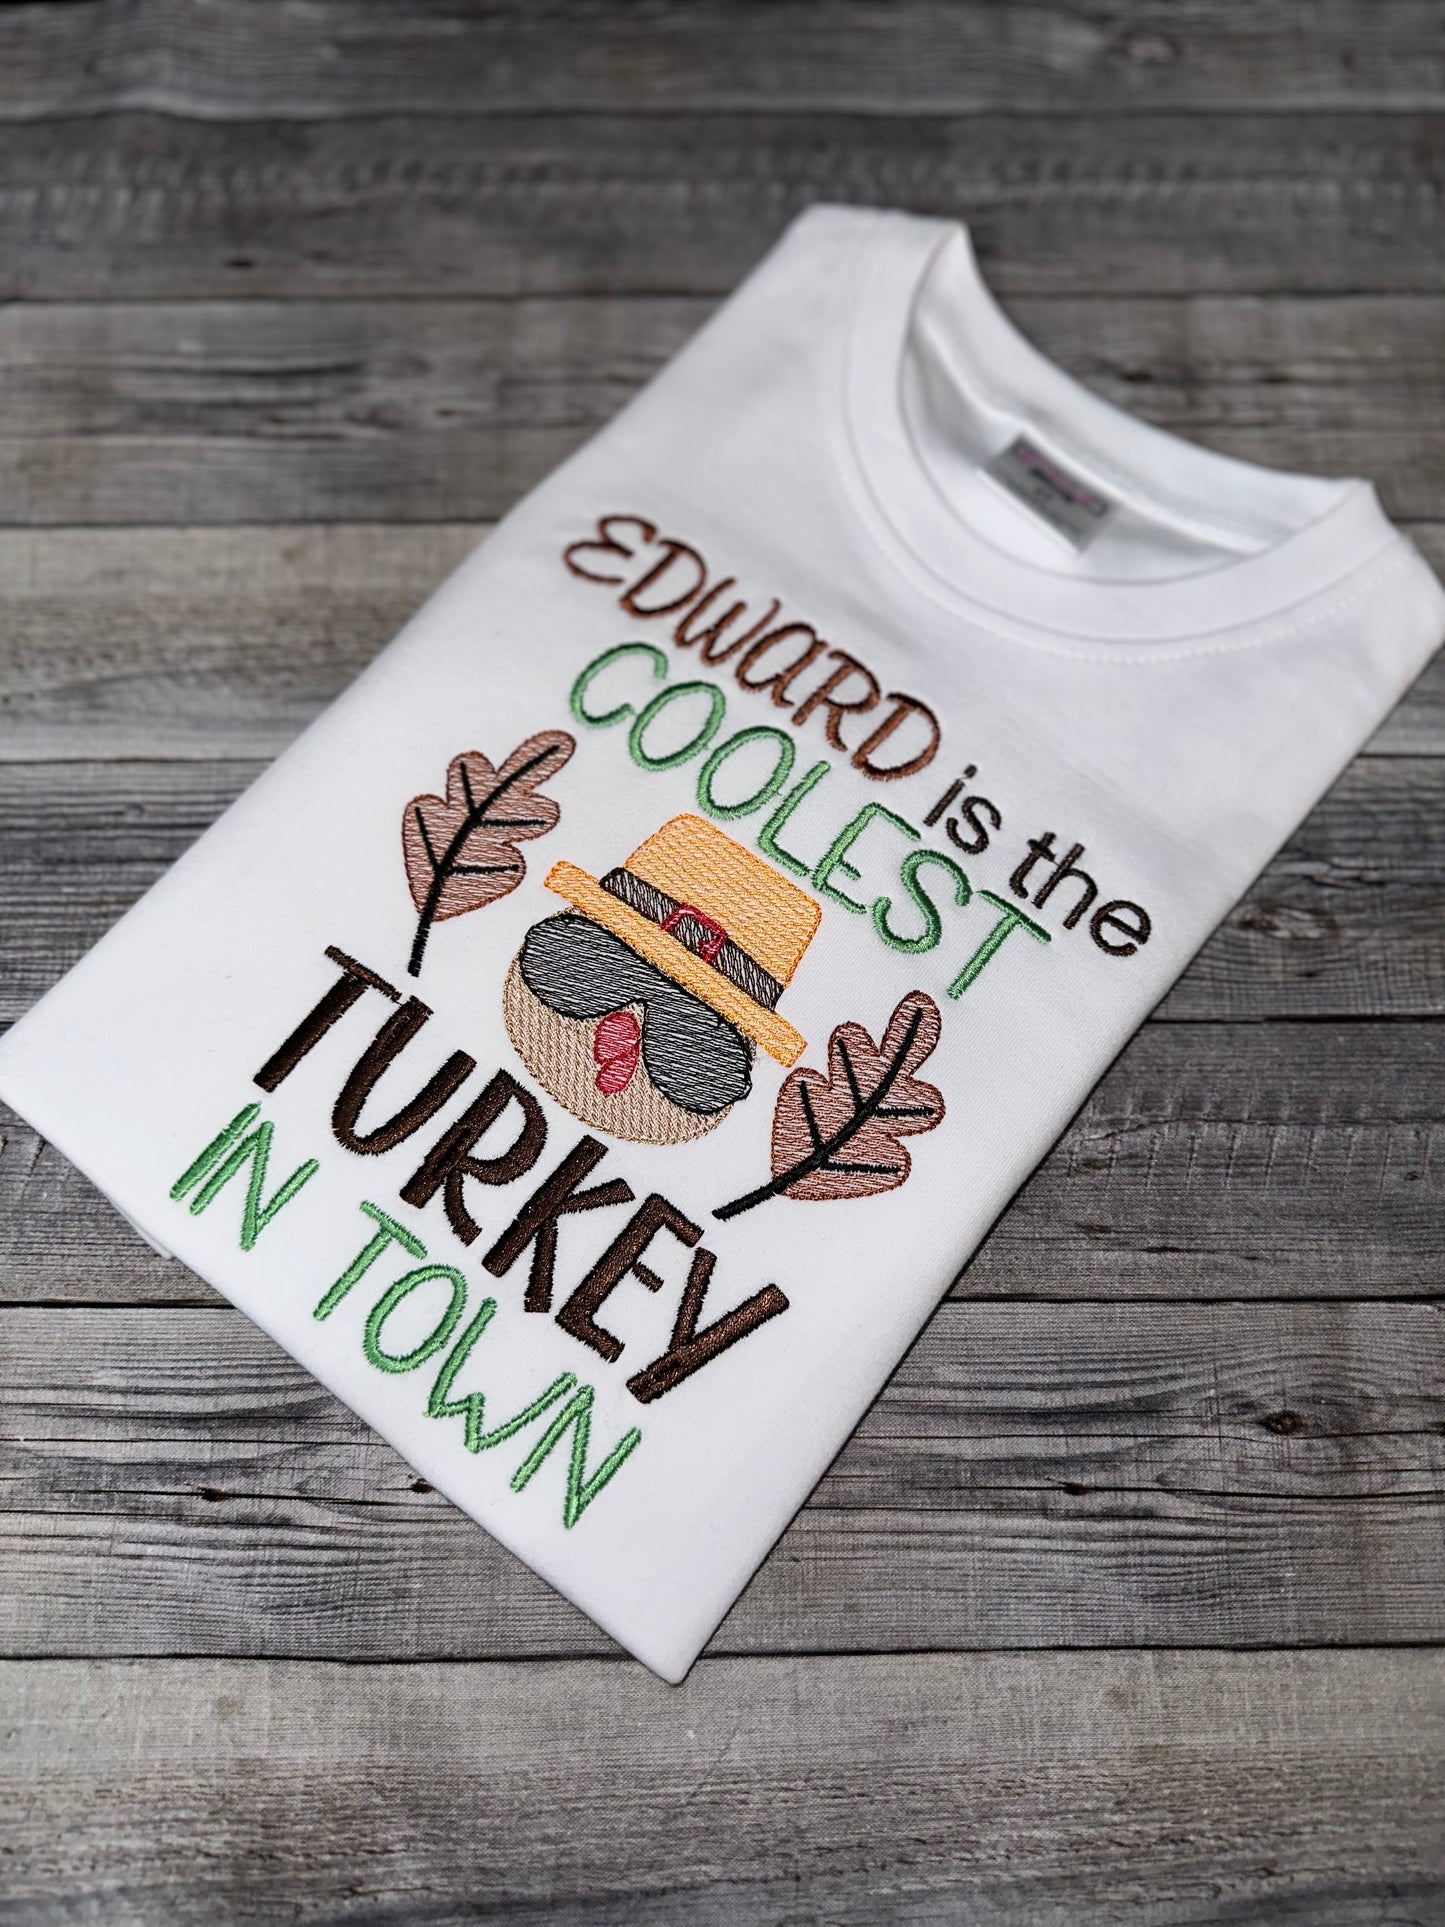 Coolest turkey in town shirt for boys- Thanksgiving Holiday shirt